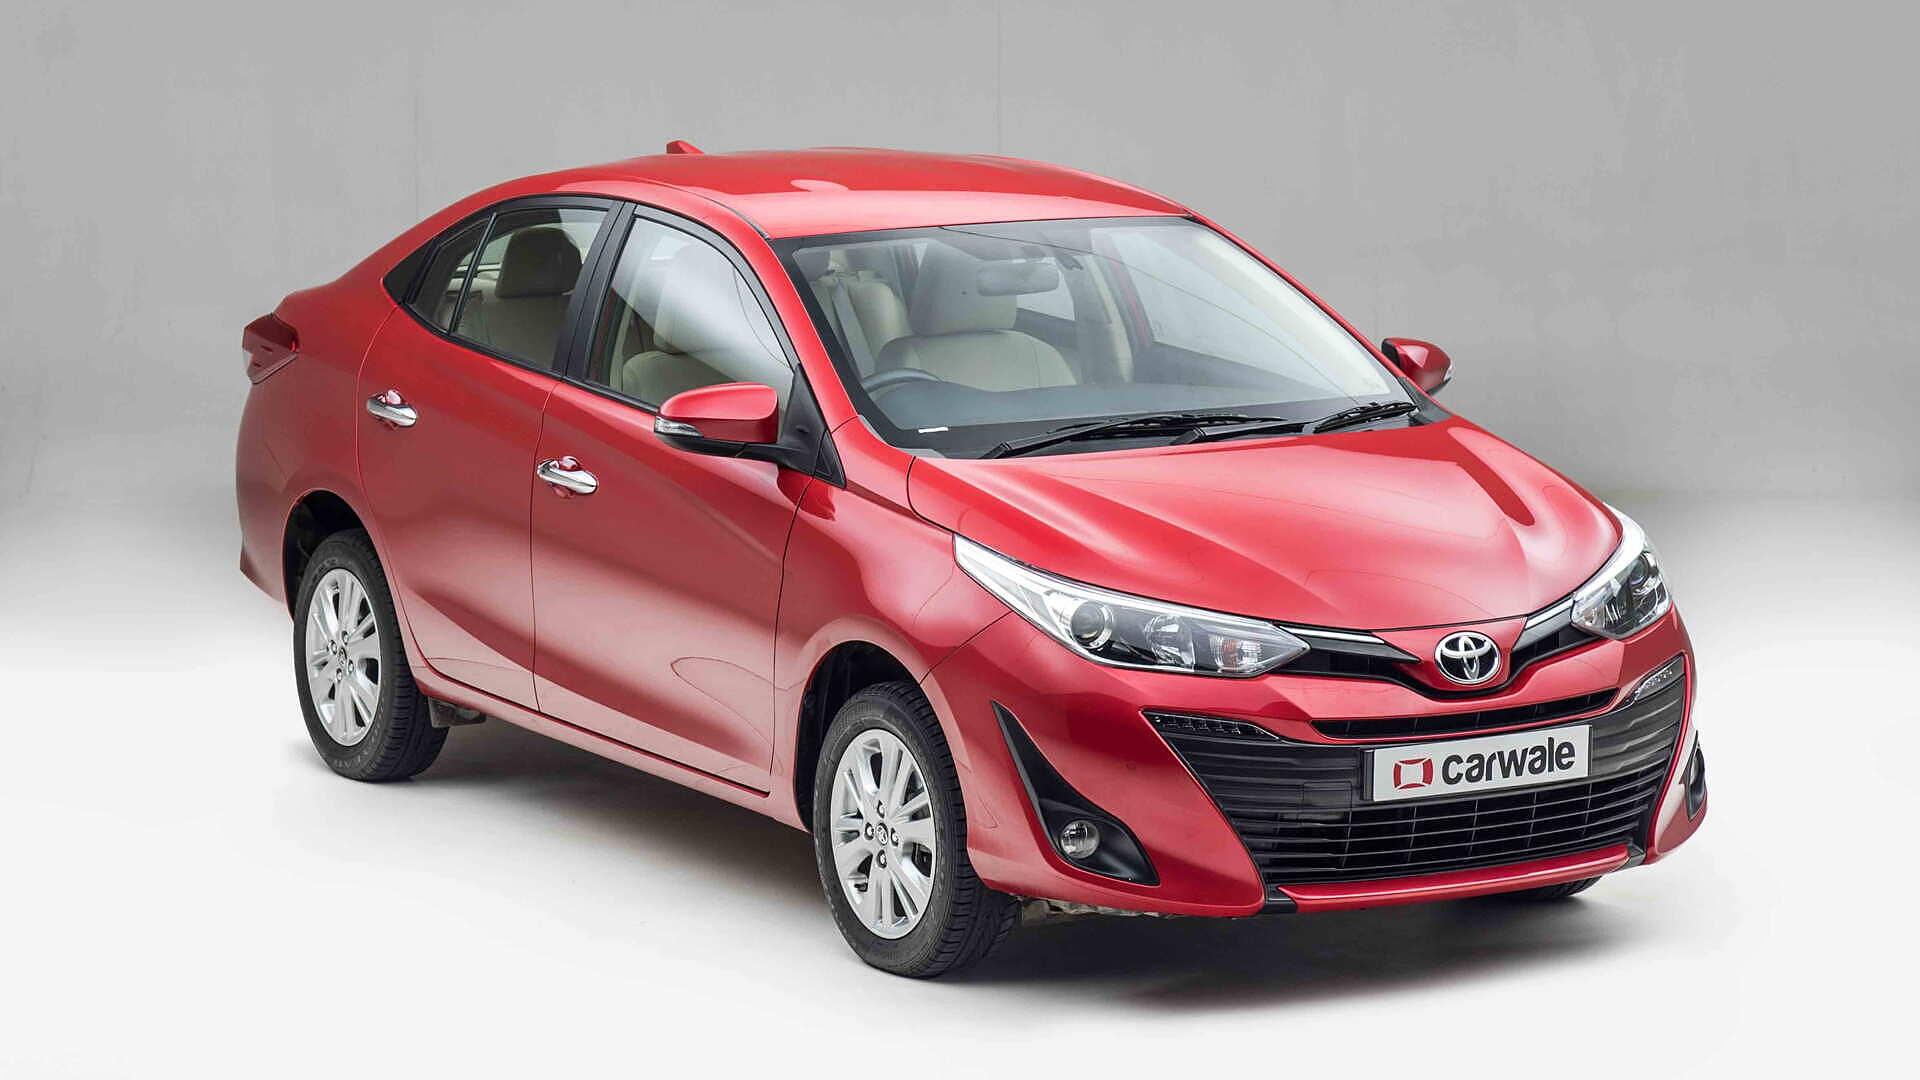 Toyota Yaris long term review, first report - Introduction